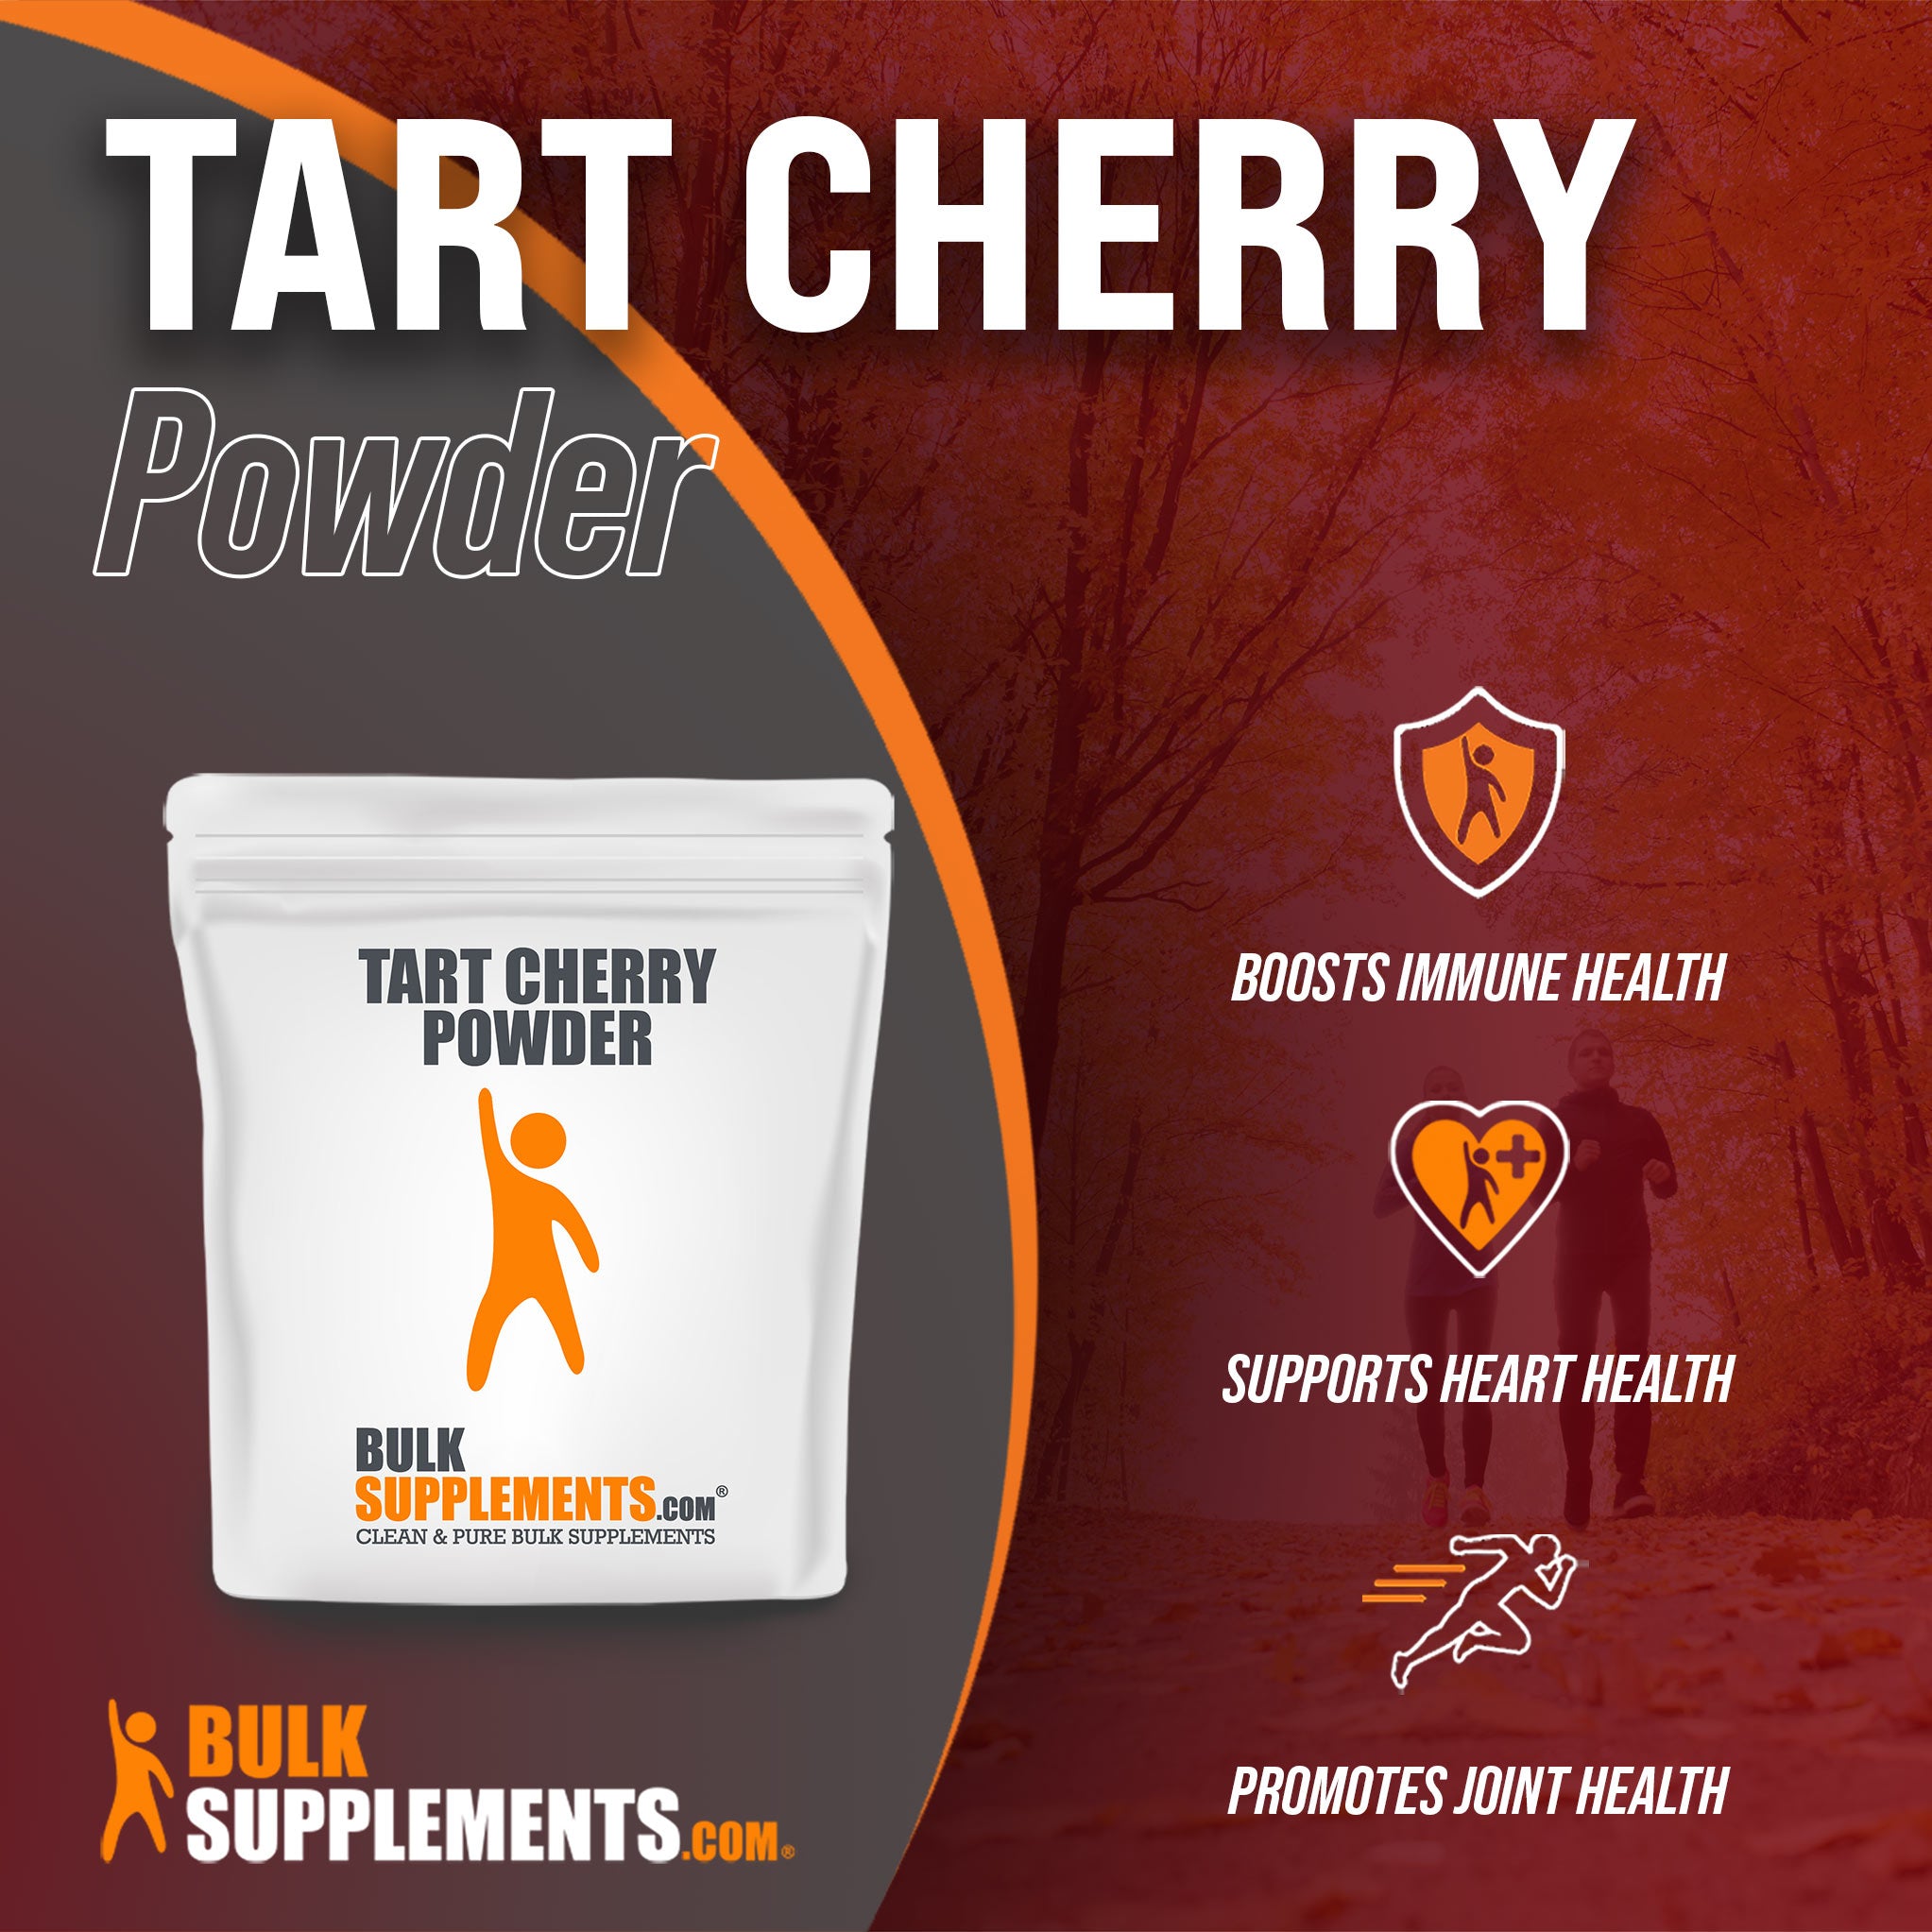 Benefits of Tart Cherry Powder: boosts immune health, supports heart health, promotes joint health